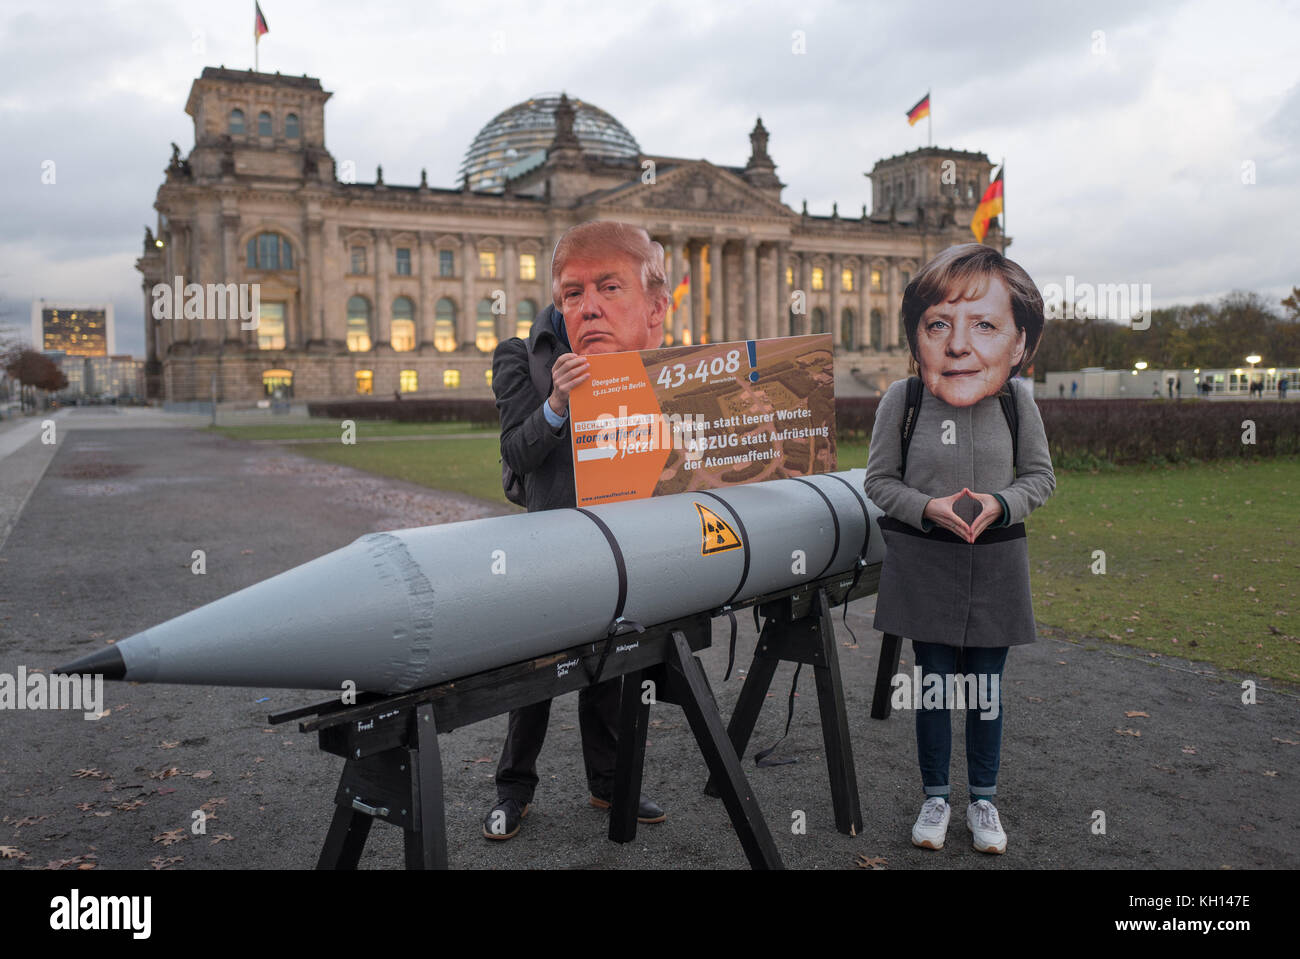 Activists demand the end of nuclear armament and the withdrawal of nuclear arms from Buechel, wearing masks of the American president and the German chancellor and a mock nuclear bomb in front of the Brandenburg Gate in Berlin, Germany, 13 November 2017. Photo: Jörg Carstensen/dpa Stock Photo